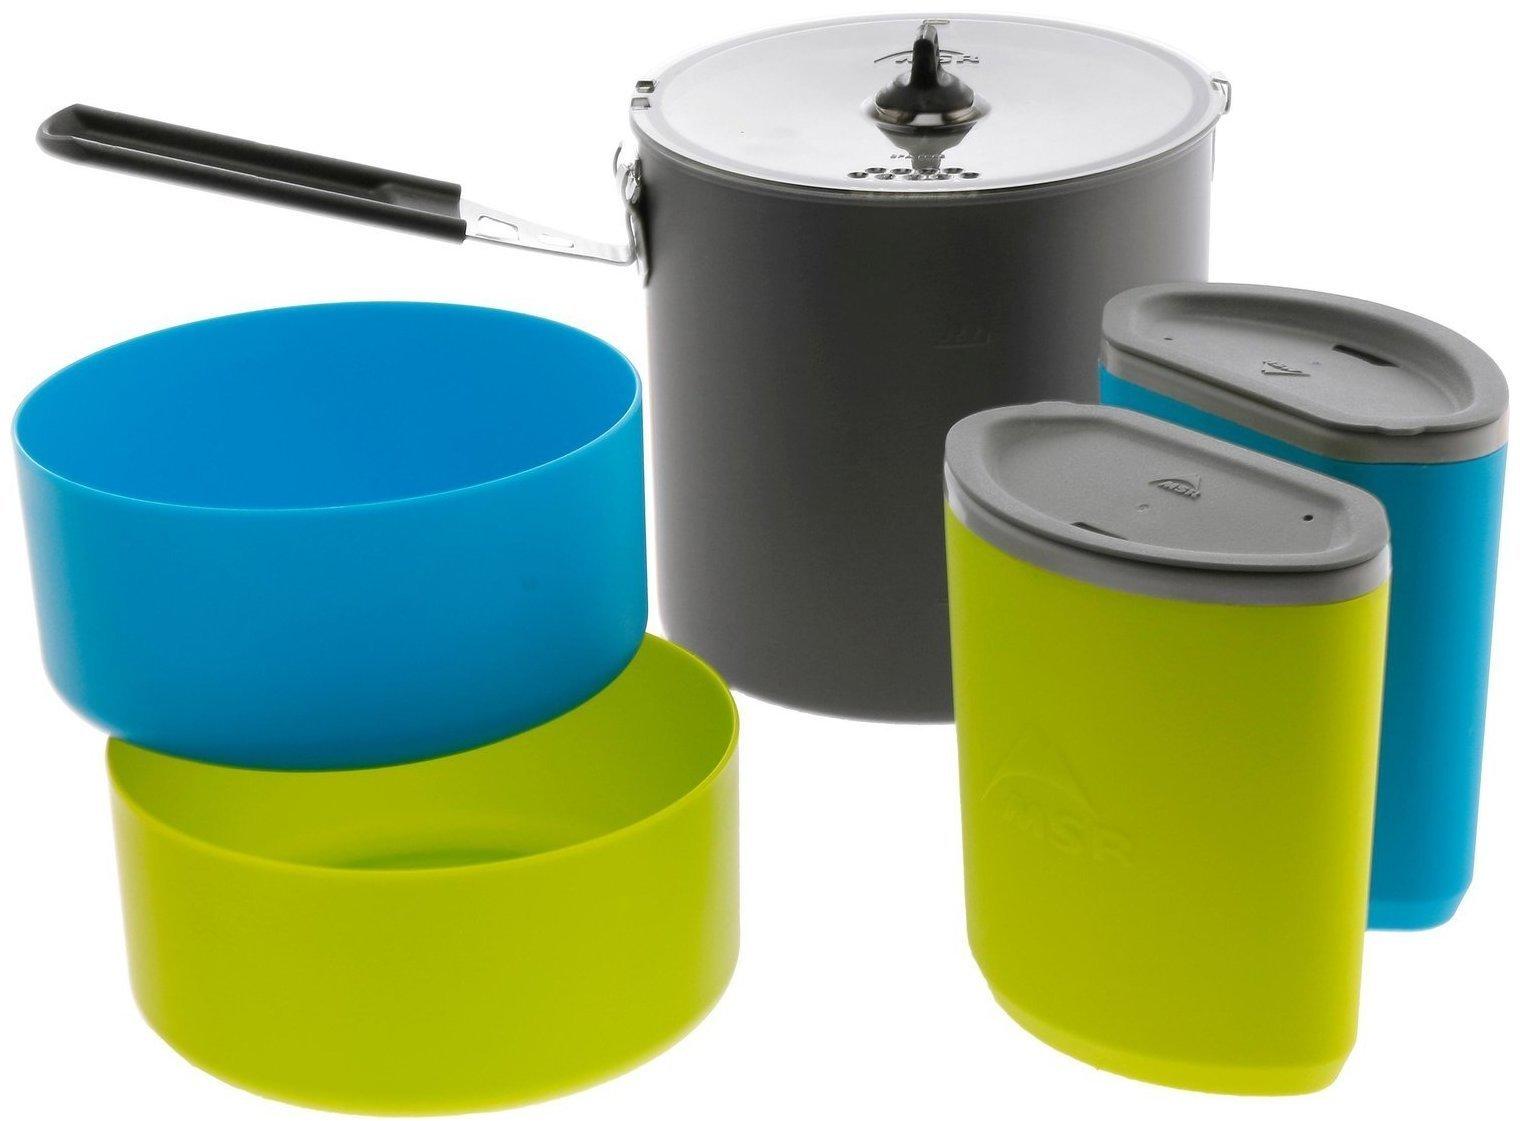 MSR Trail Lite Duo System Camping Cookware Set